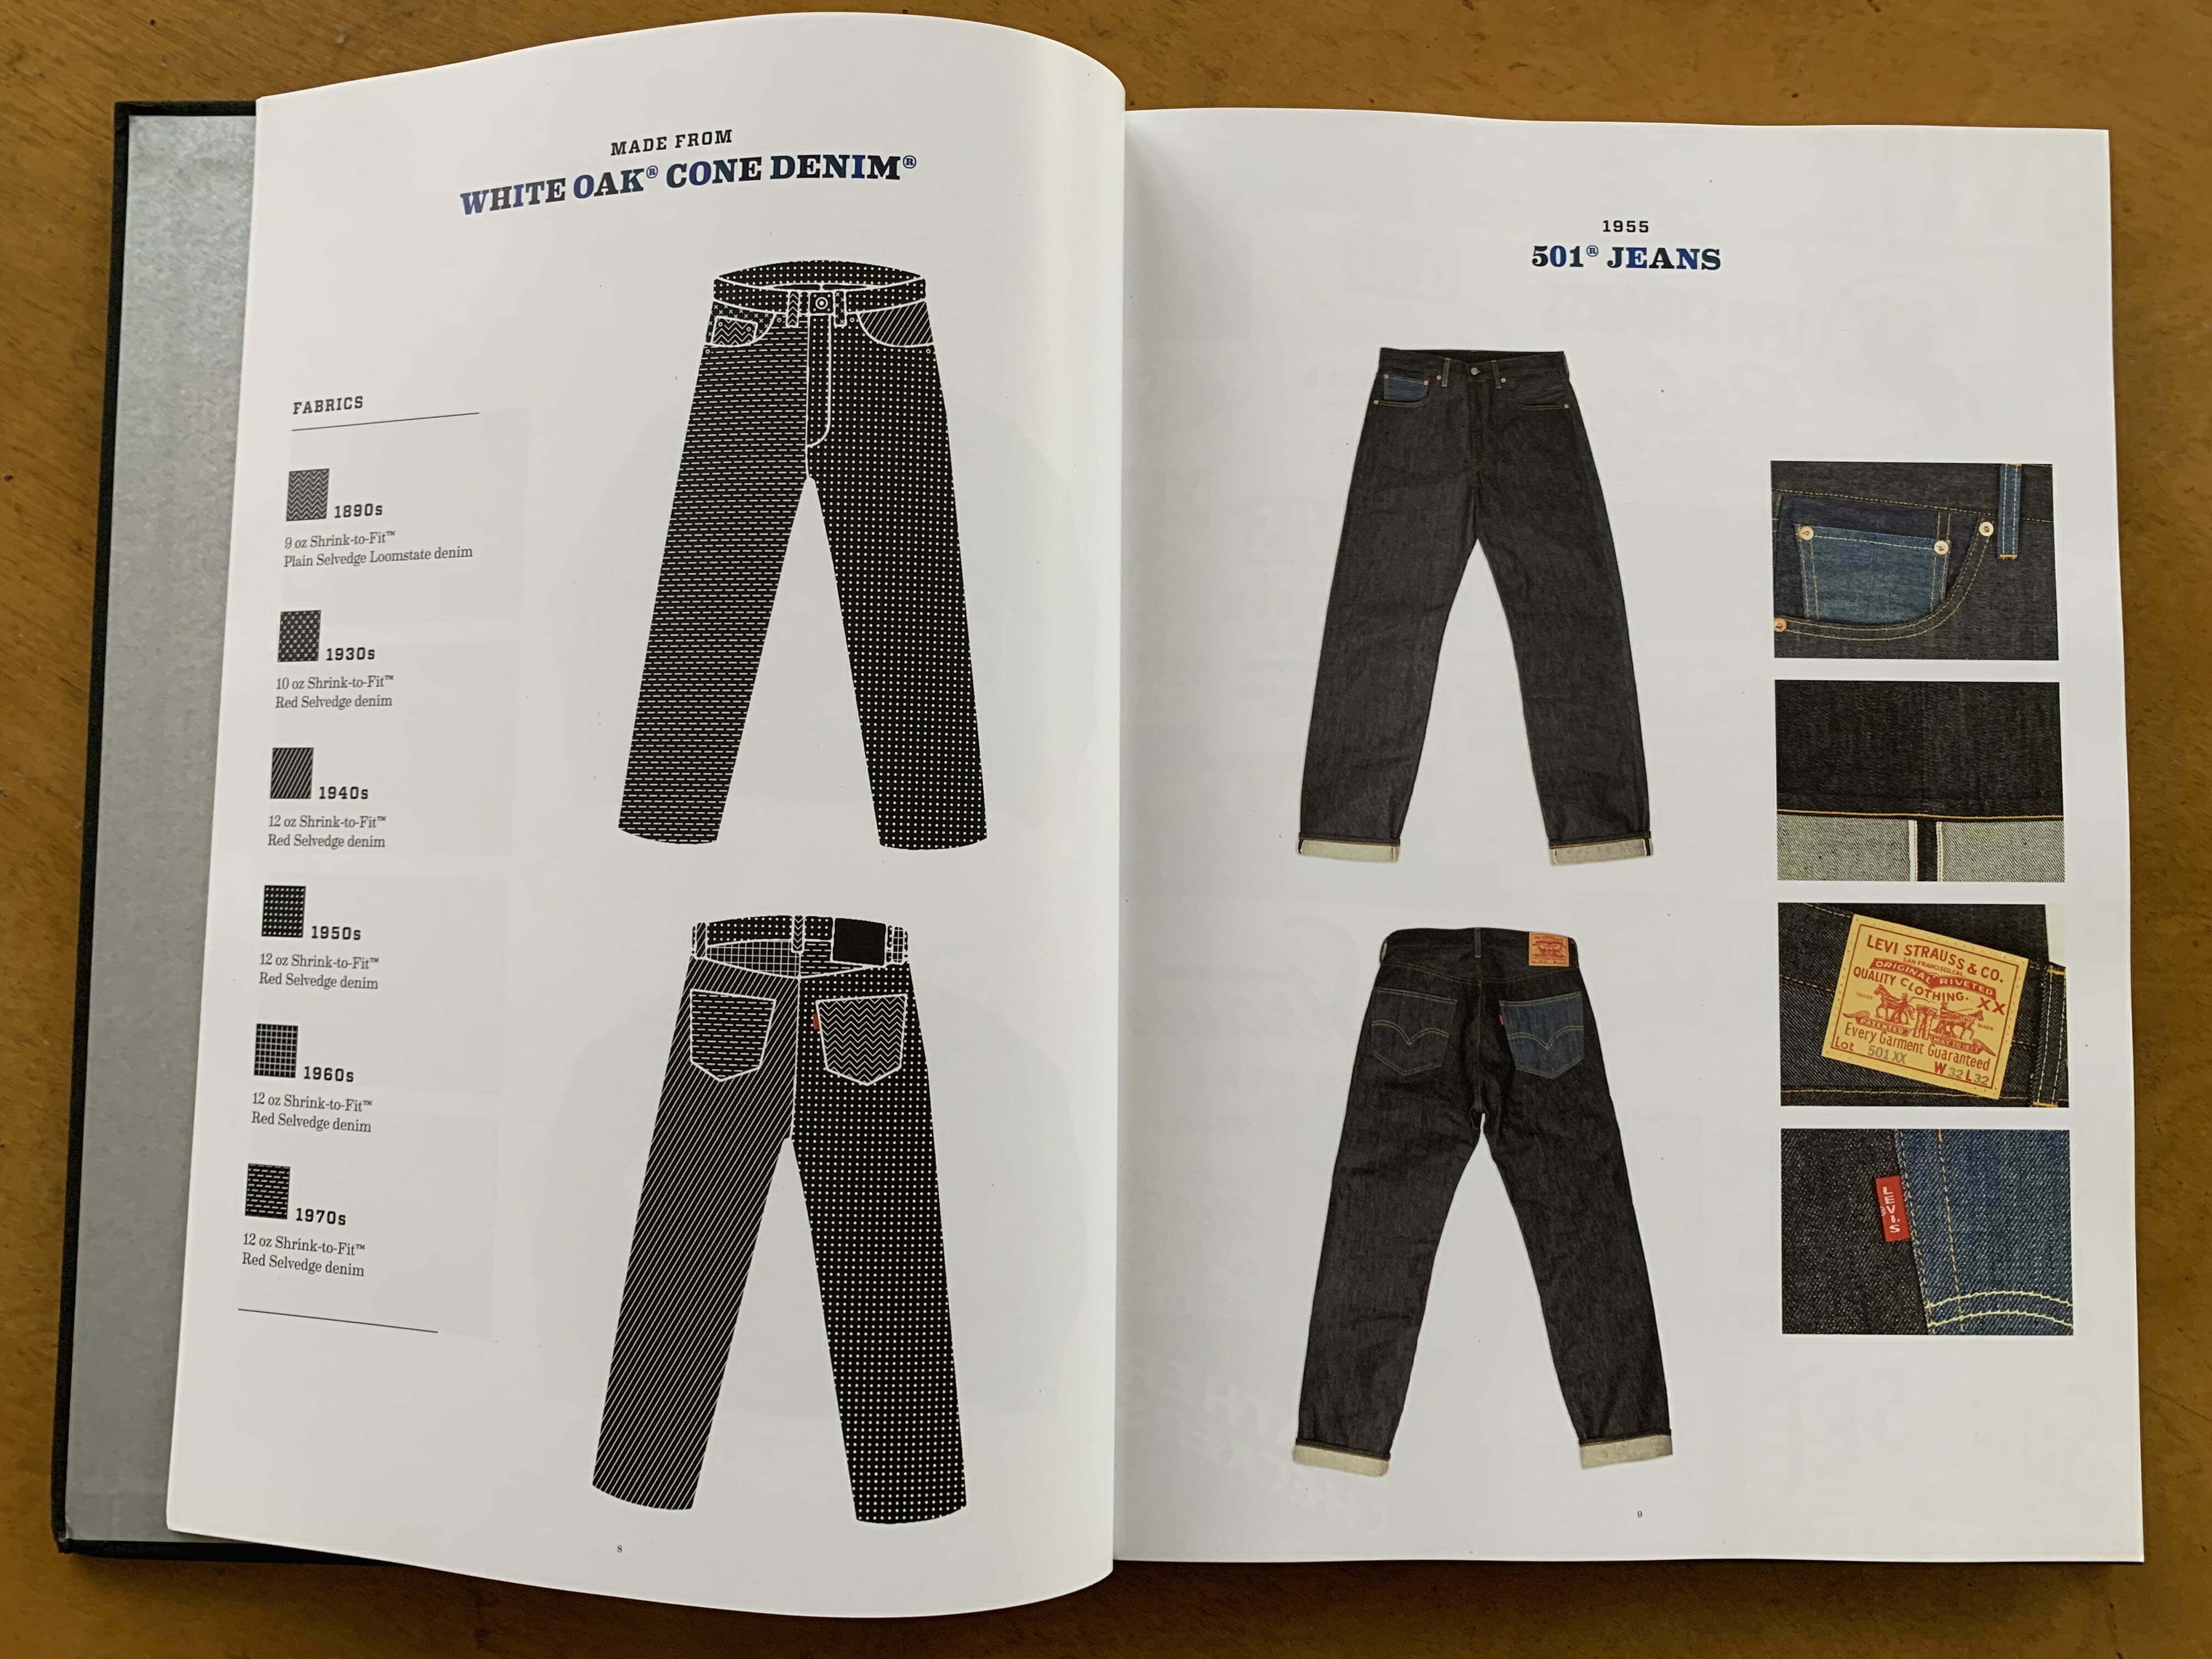 Only 150 early birds will get a ” collection books” by Levi's 